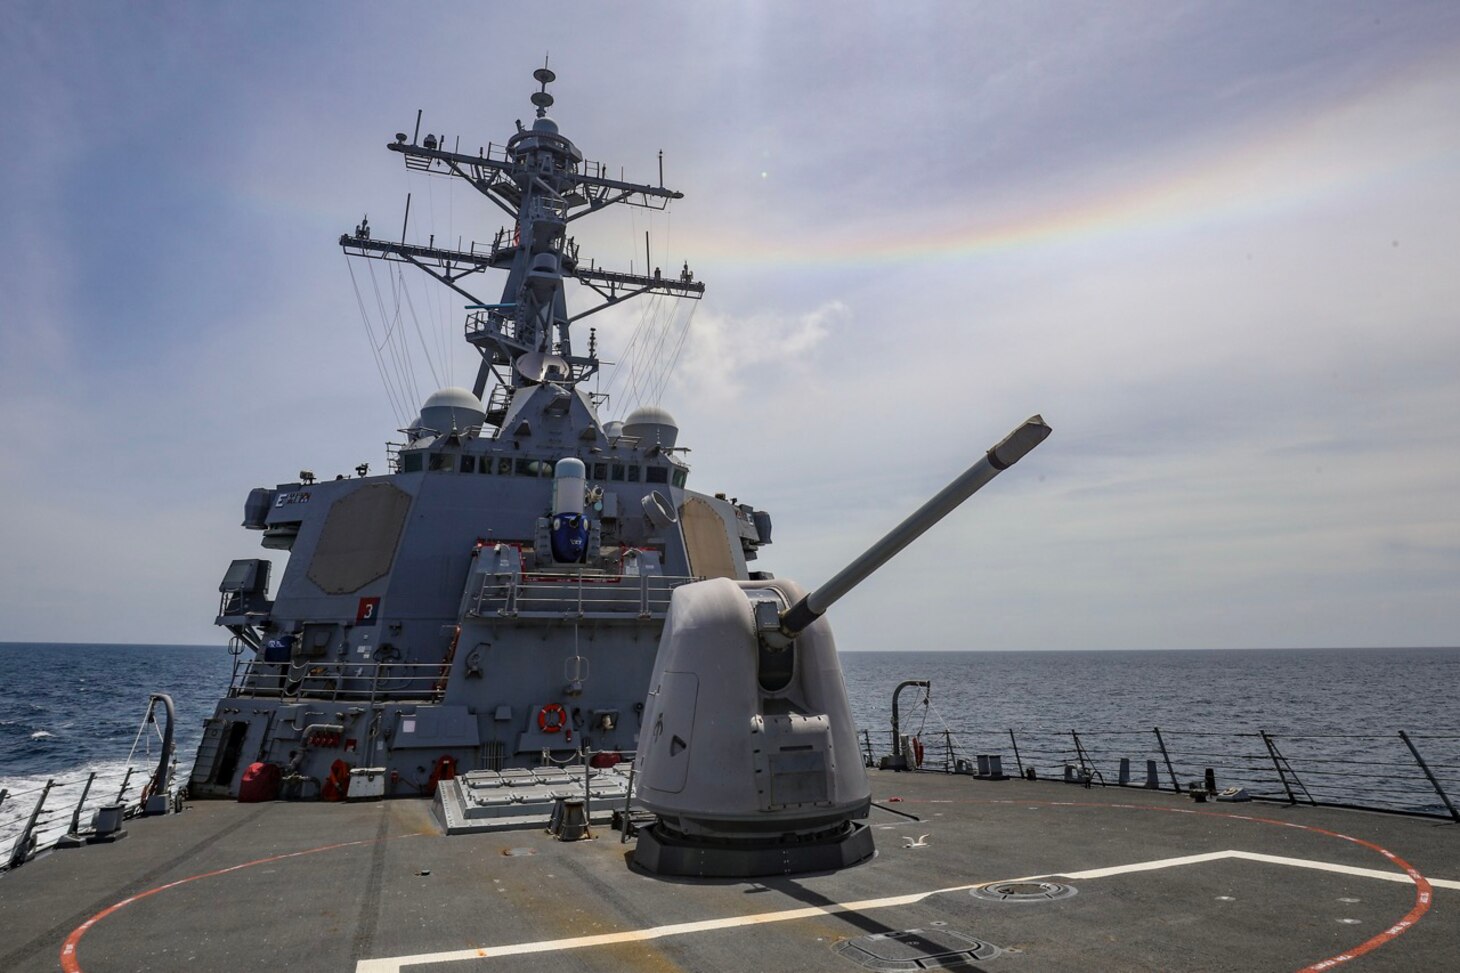 Arleigh Burke-class guided-missile destroyer USS Benfold (DDG 65) conducts routine underway operations. Benfold is forward-deployed to the U.S. 7th Fleet area of operations in support of a free and open Indo-Pacific. (U.S. Navy photo by Mass Communication Specialist 2nd Class Arthur Rosen)